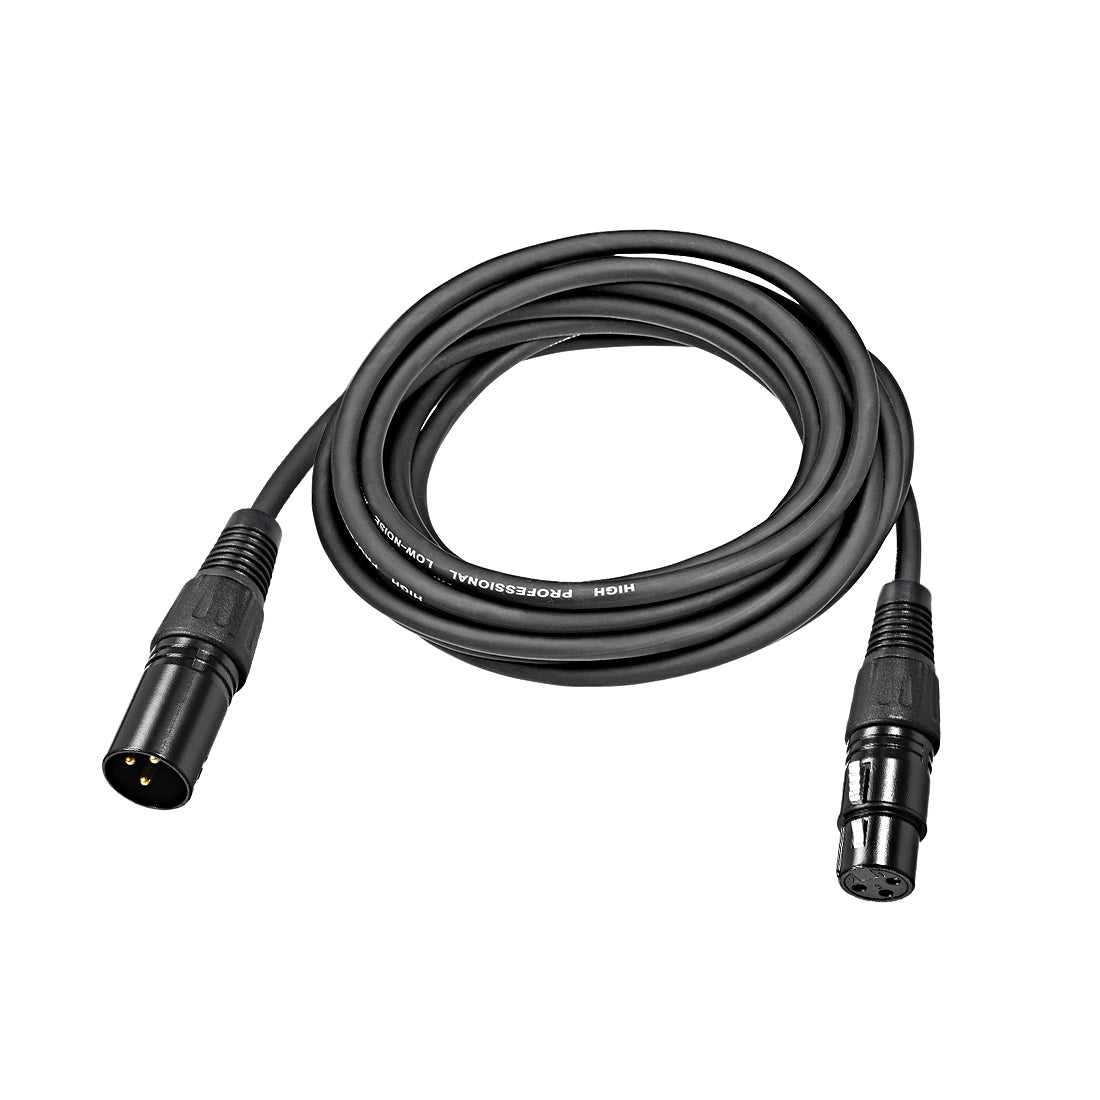 uxcell Uxcell XLR Male to XLR Female Cable Line for Microphone Video Camera Sound Card Mixer Black XLR Black Line 5M 16.4ft